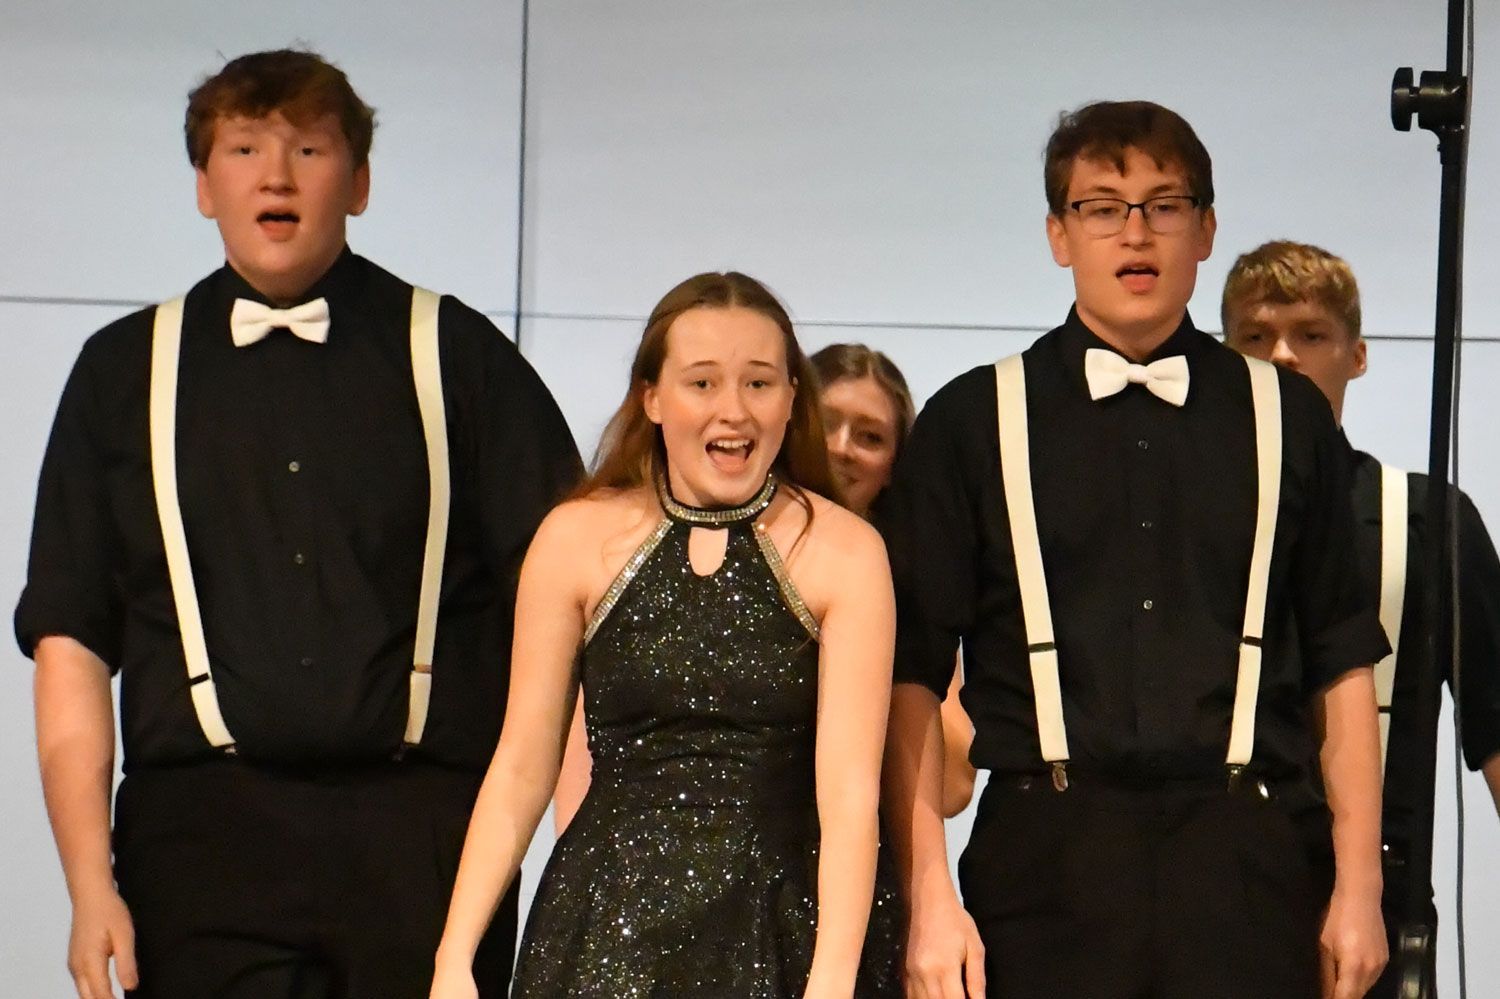 Five of the Choraliers singing and dancing on stage